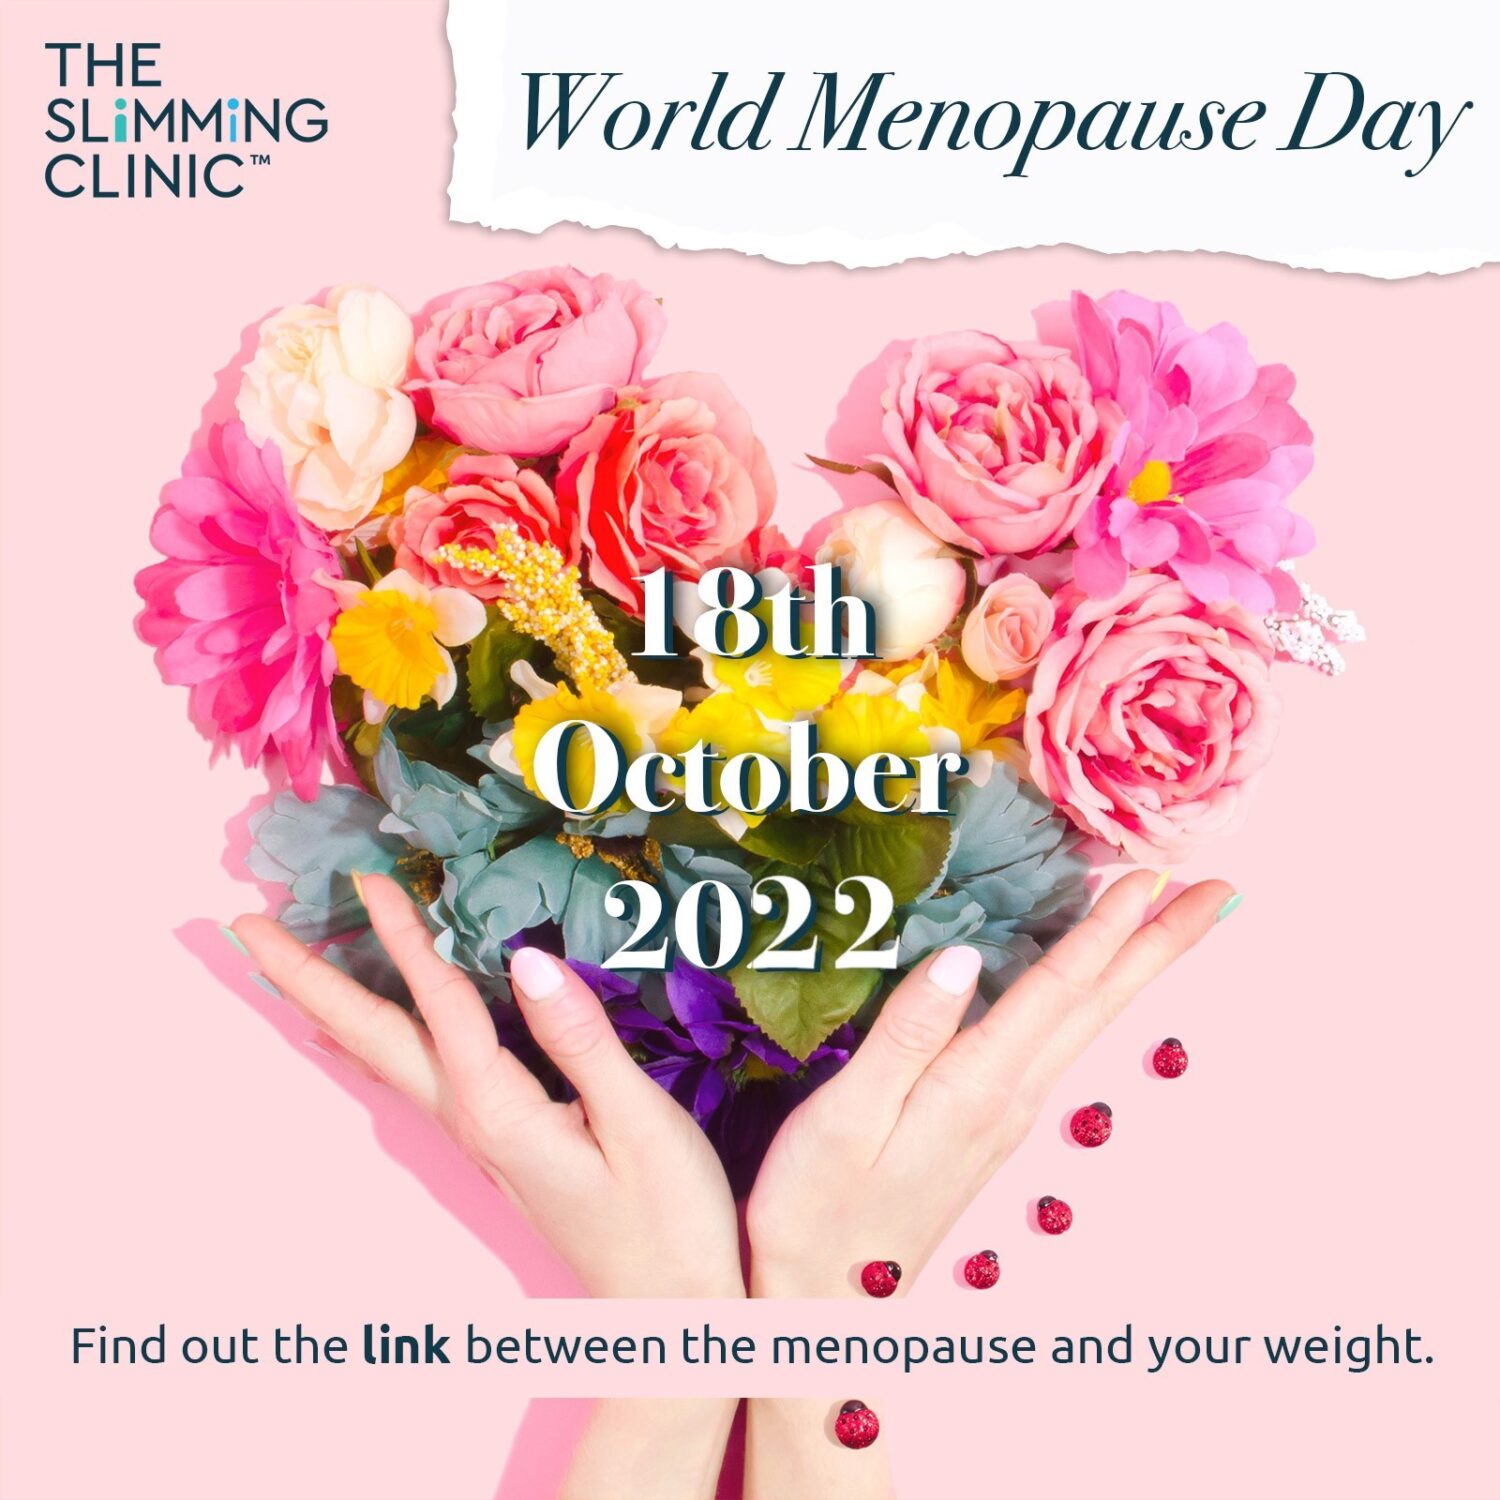 Is The Menopause Making You Gain Weight?